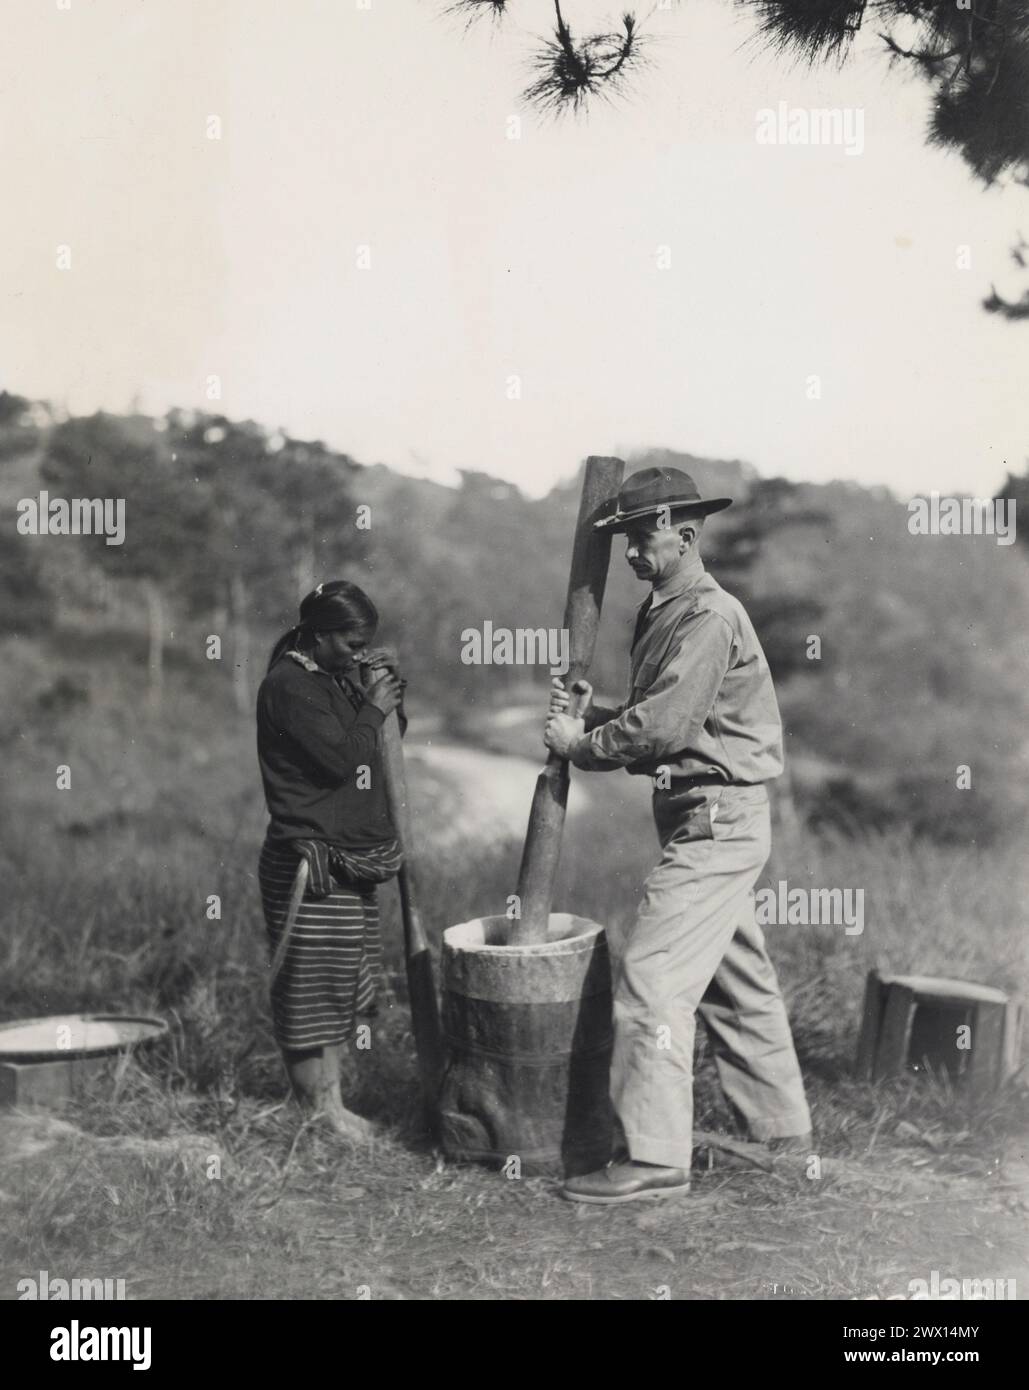 Taken at Camp John Hay Native Barrio, Baguio, Philippine Islands An Ifugao woman watches an American Soldier try his hand at pounding rice ca. 1931 Stock Photo